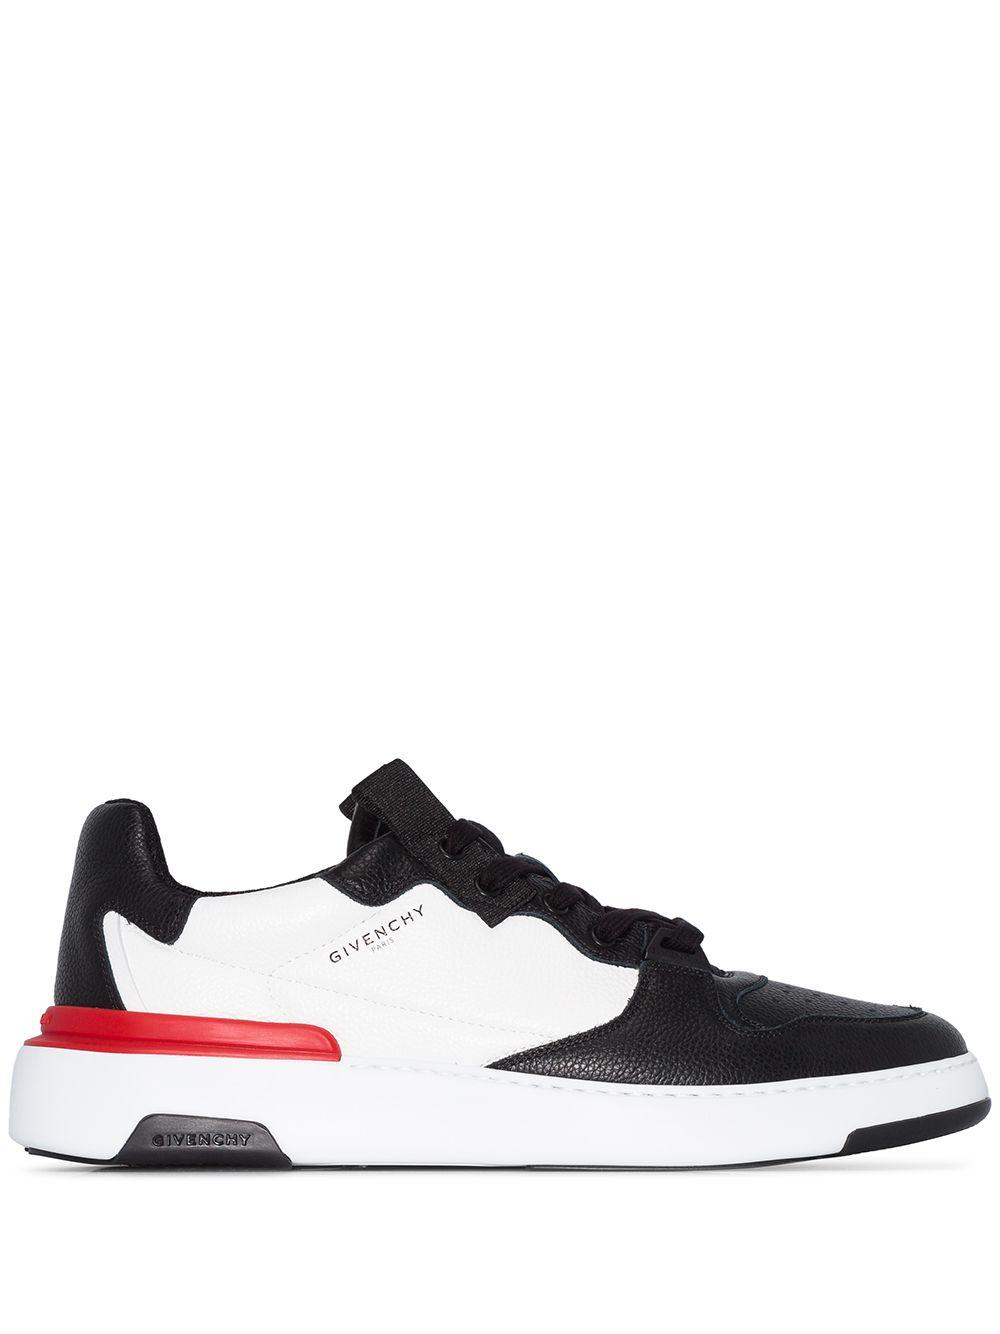 Givenchy Wing Low Sneakers in Black for Men | Lyst